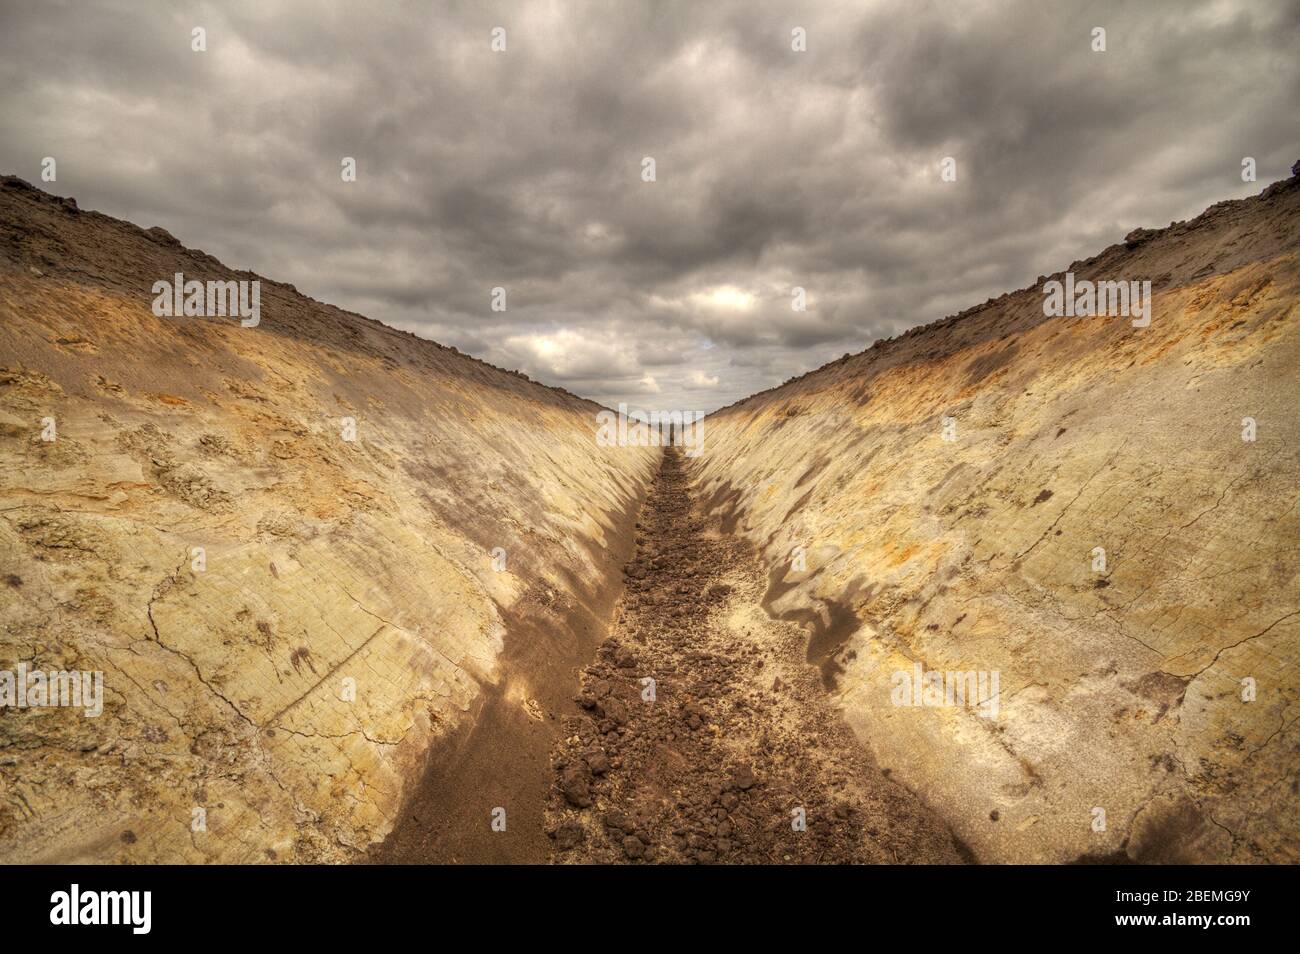 Freshly dug field drainage ditch showing soil stratification under a sky with dark clouds Stock Photo